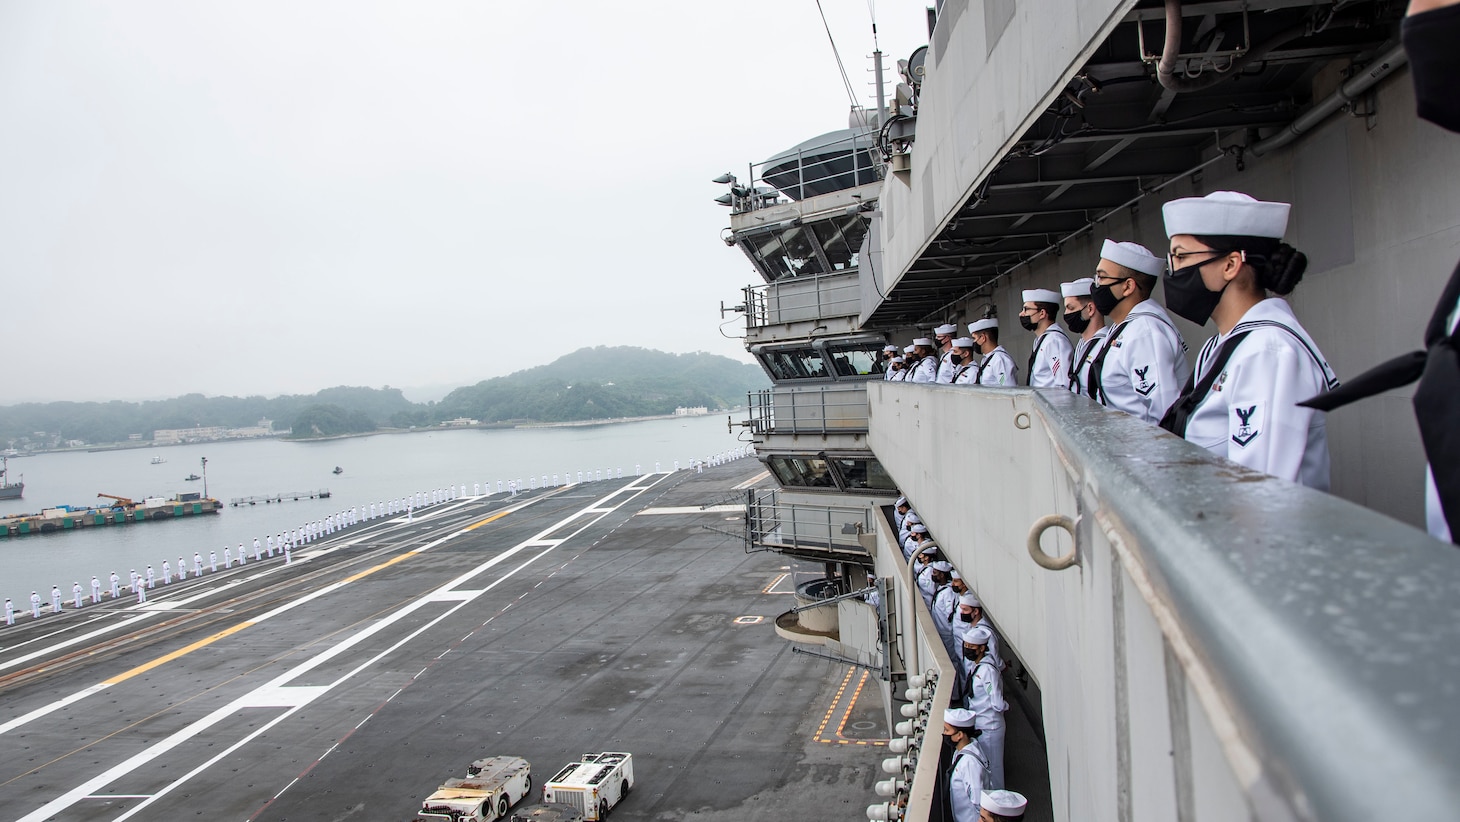 210519-N-WS494-1108 YOKOSUKA, Japan (May 19, 2021) Sailors man the rails aboard the U.S. Navy’s only forward-deployed aircraft carrier USS Ronald Reagan (CVN 76) as it departs Commander, Fleet Activities Yokosuka, Japan. Ronald Reagan, the flagship of Carrier Strike Group Five, provides a combat-ready force that protects and defends the United States, as well as the collective maritime interests of its allies and partners in the Indo-Pacific region. (U.S. Navy photo by Mass Communication Specialist 3rd Class Quinton A. Lee)